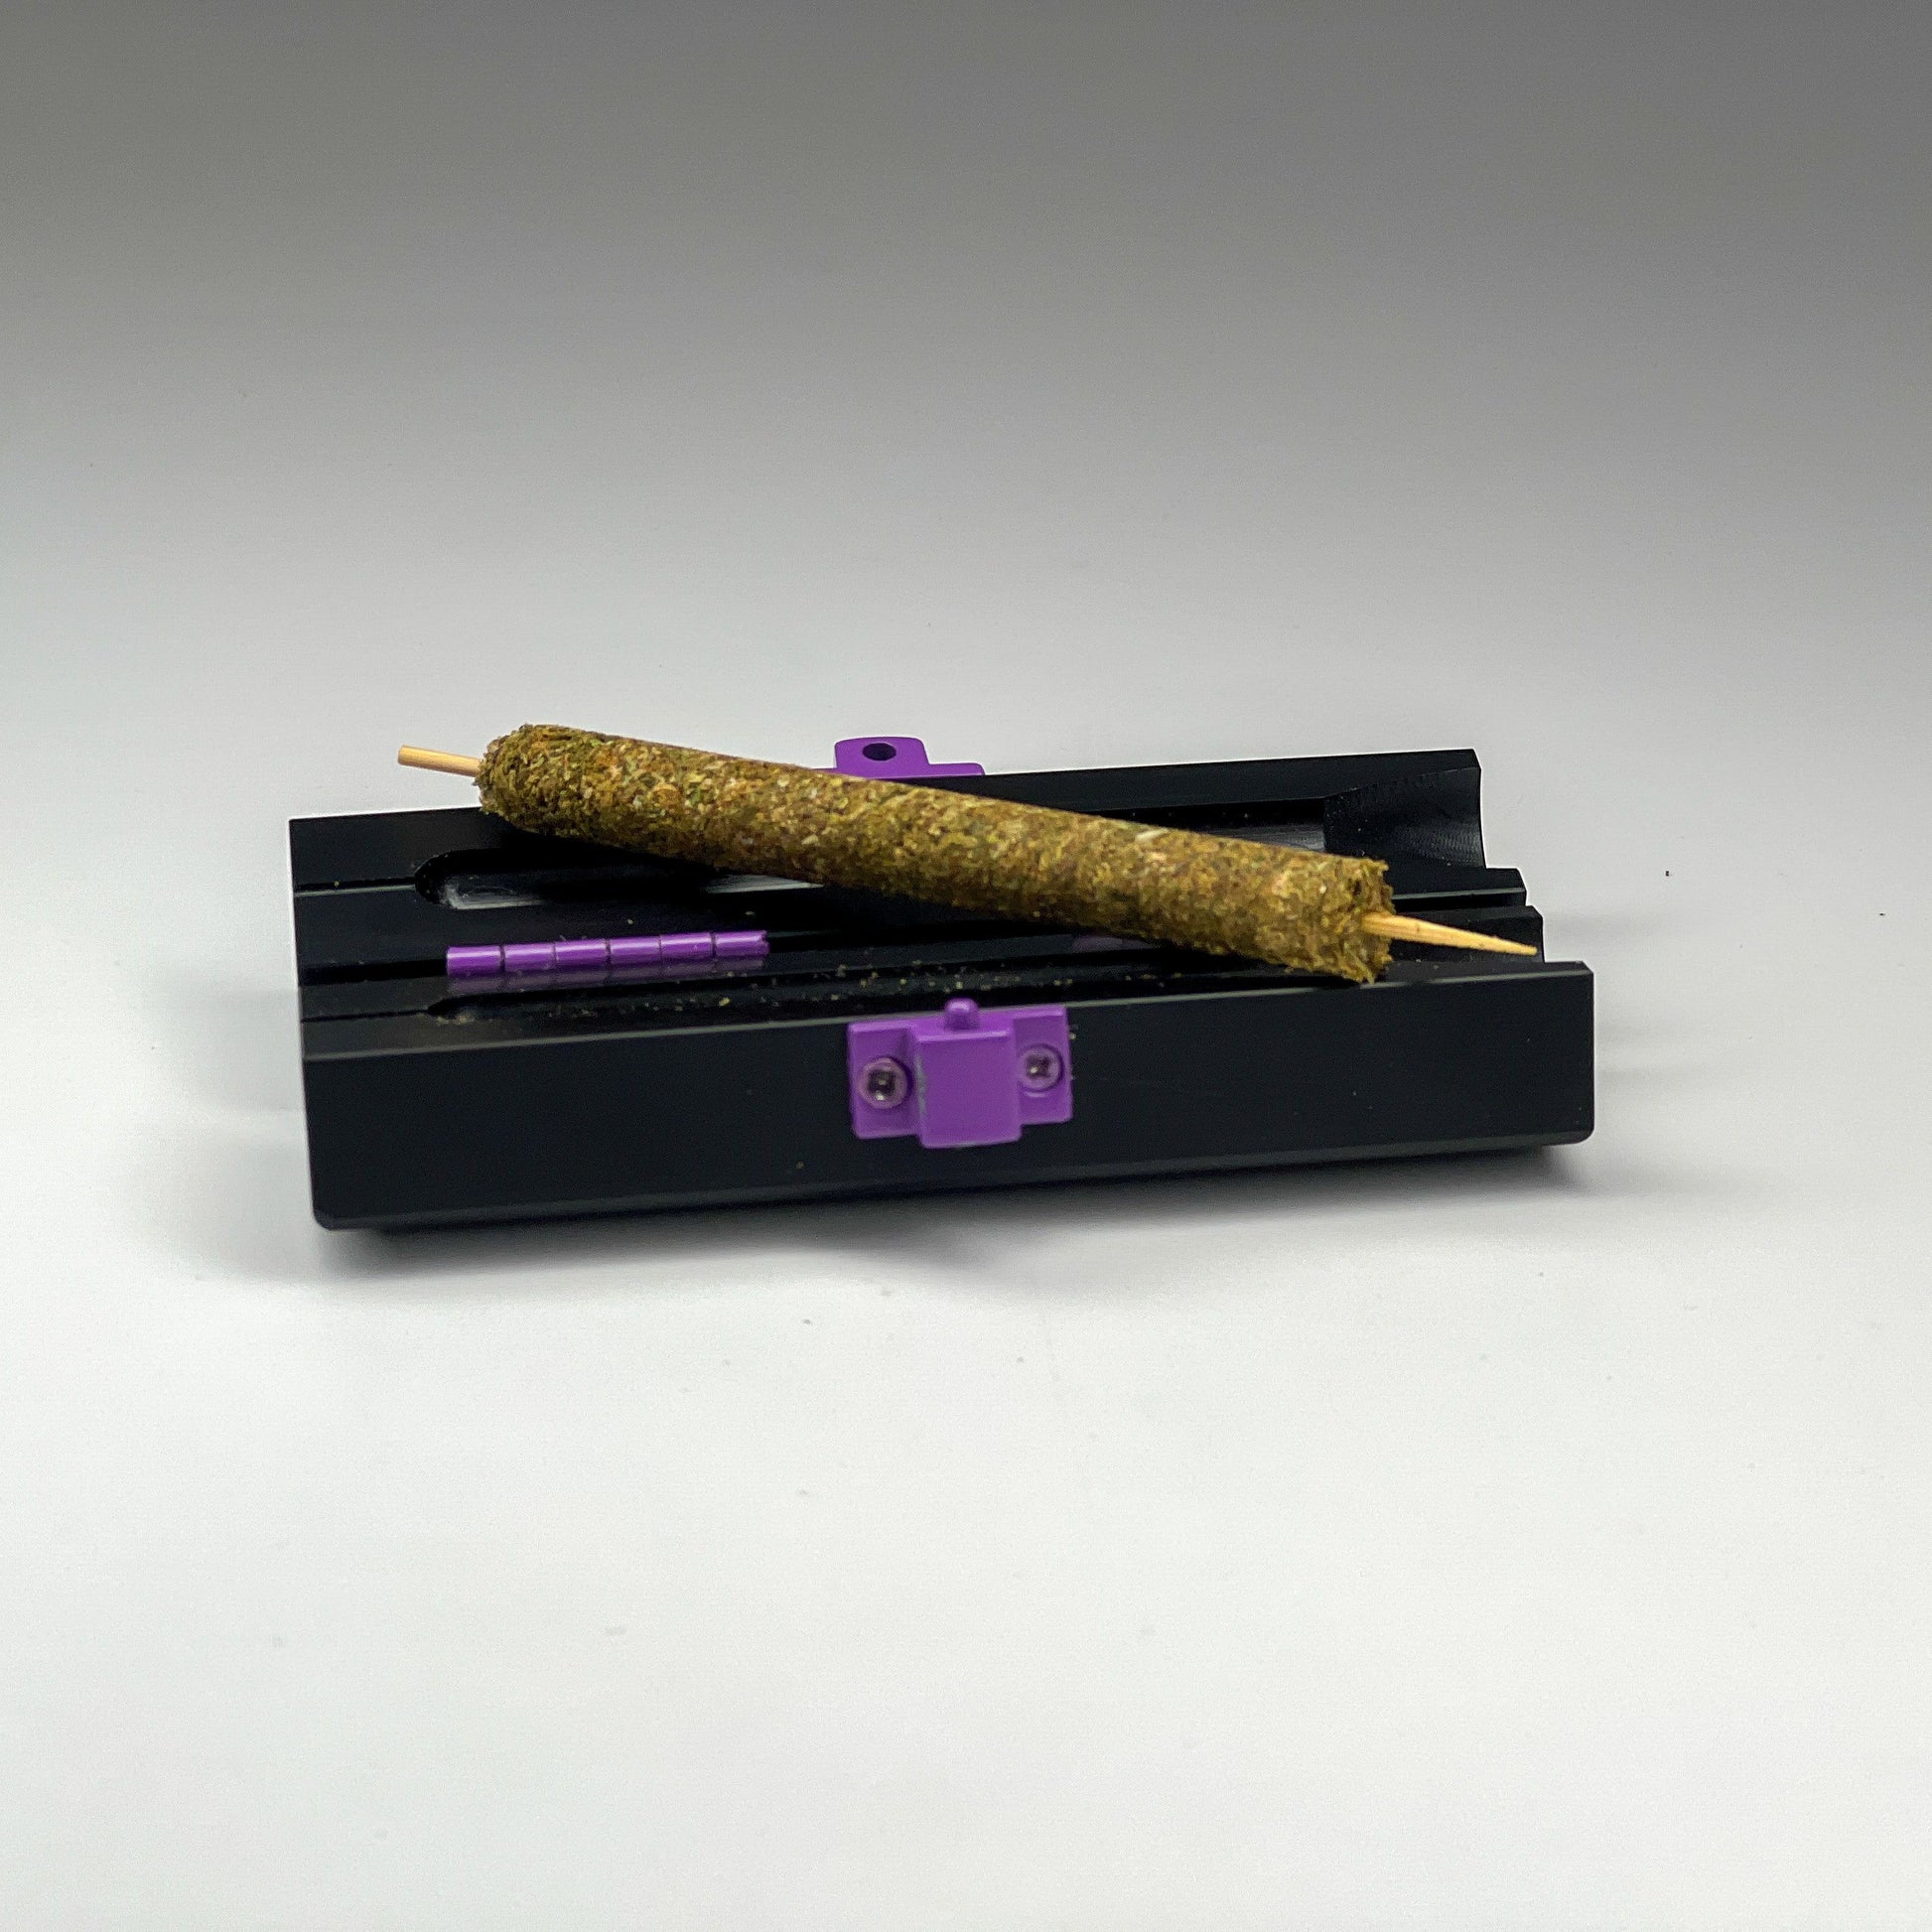 1g Mini Cannagar displayed packed with cannabis as an easy to roll blunt roller kit for beginners.